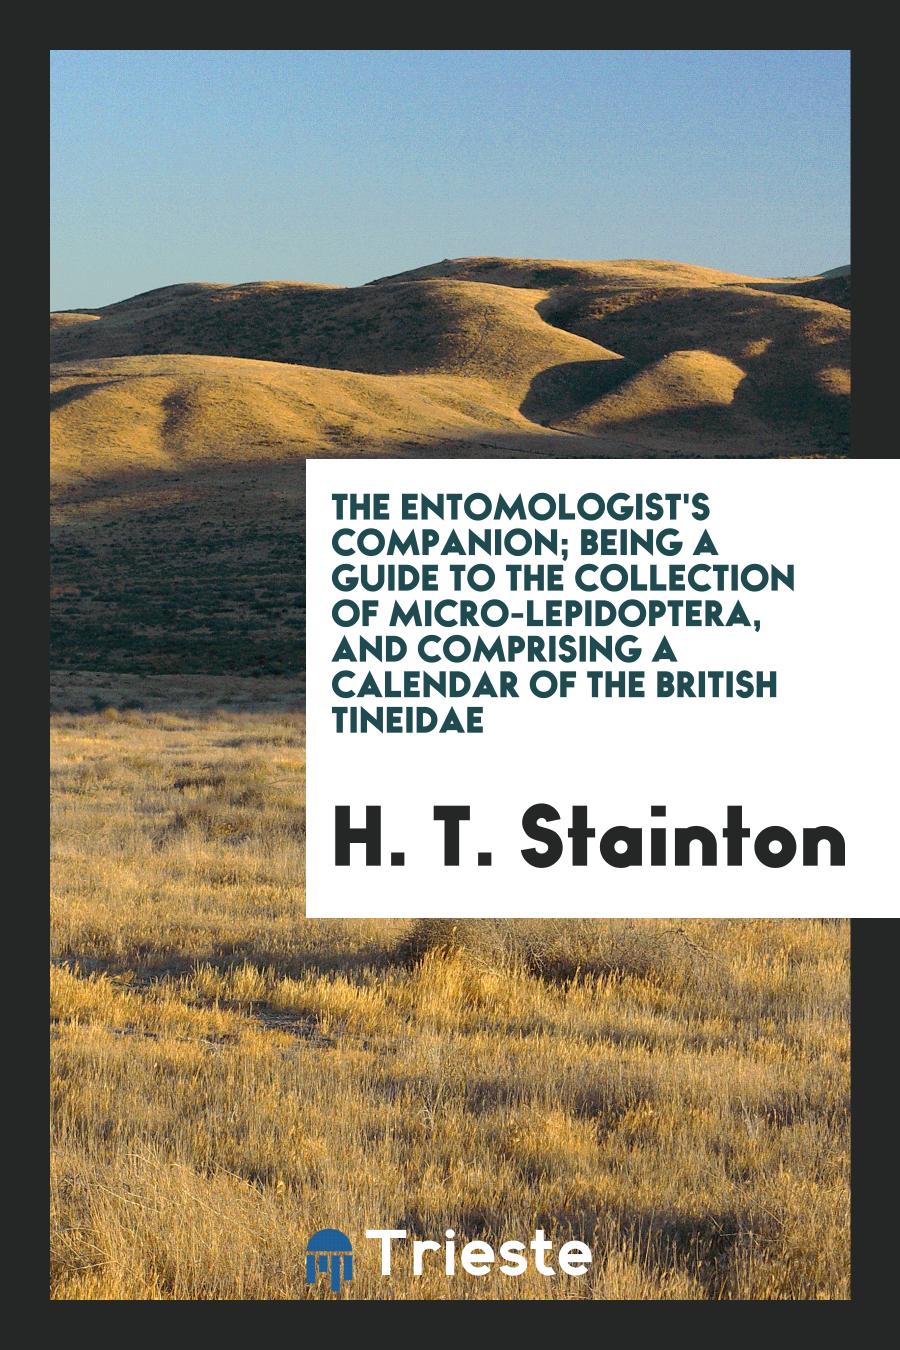 The entomologist's companion; Being a guide to the collection of micro-lepidoptera, and comprising a calendar of the British Tineidae